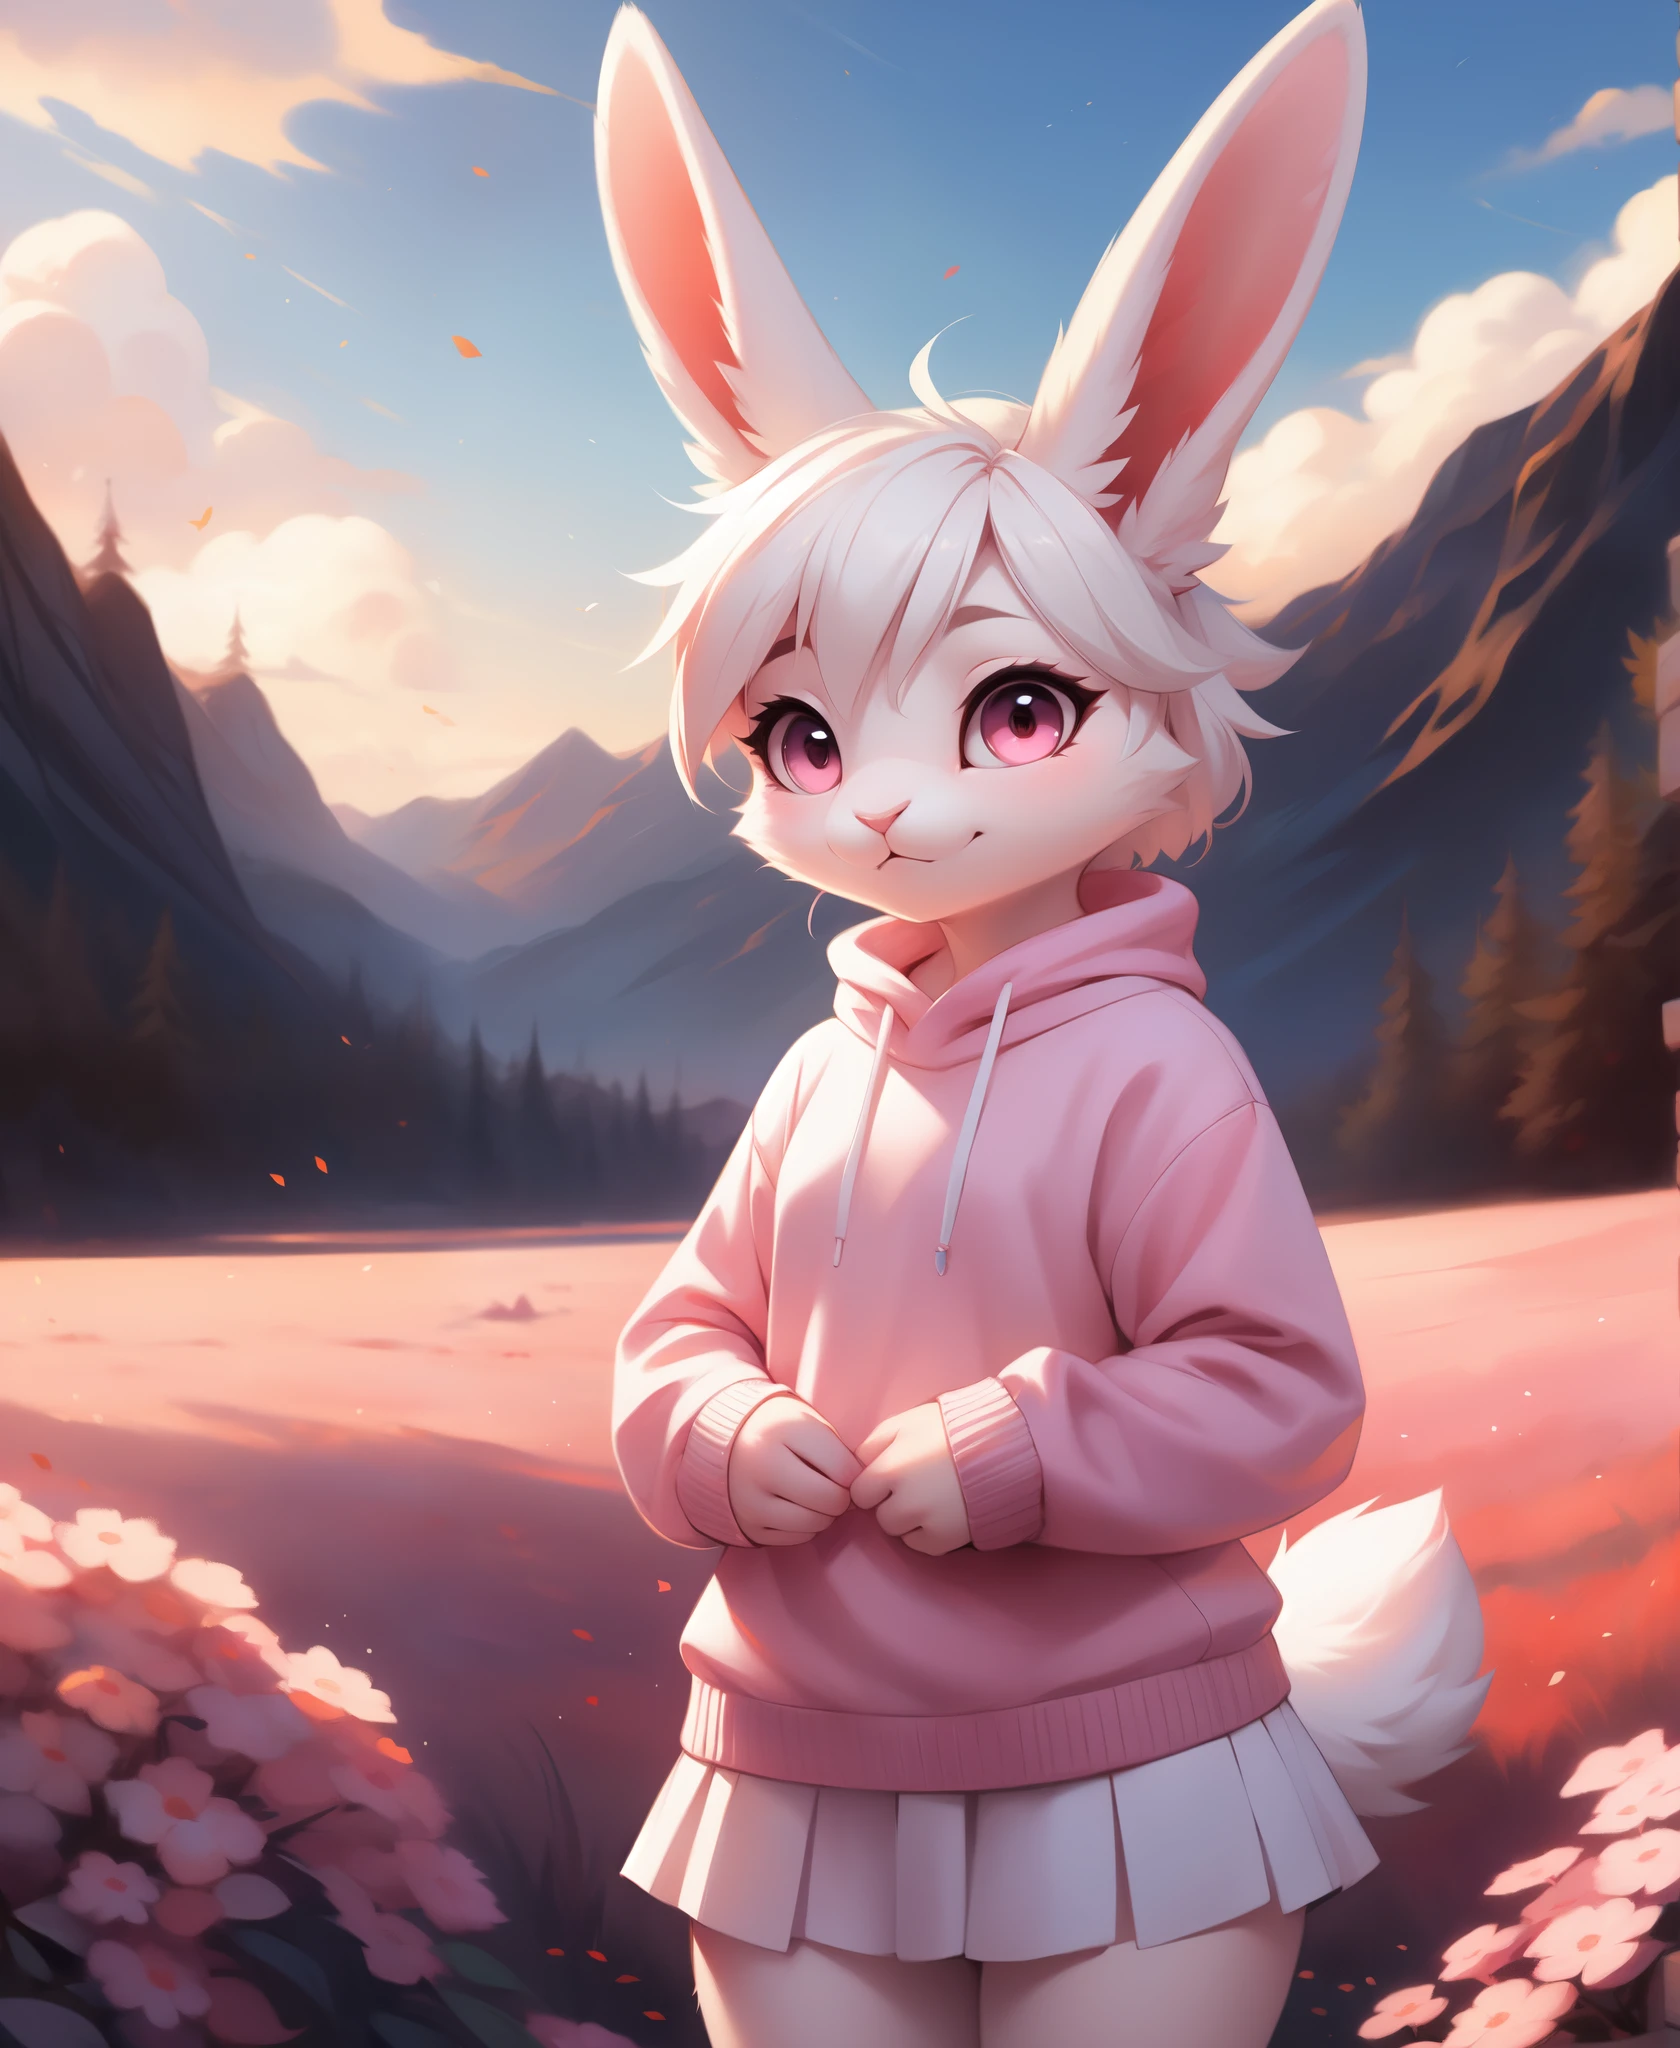 by waspsalad, by qupostuv35, by tsampikos, anthro, furry, pastel colors, 1girl, bunny girl, realistic, rabbit nose, white fur, pink eyes, white hair, sweater, flat_chested, pose, cute, dreamy, full background, perfect hands, scenery, (gradients), focus face,Animal,FurryCore, chibi